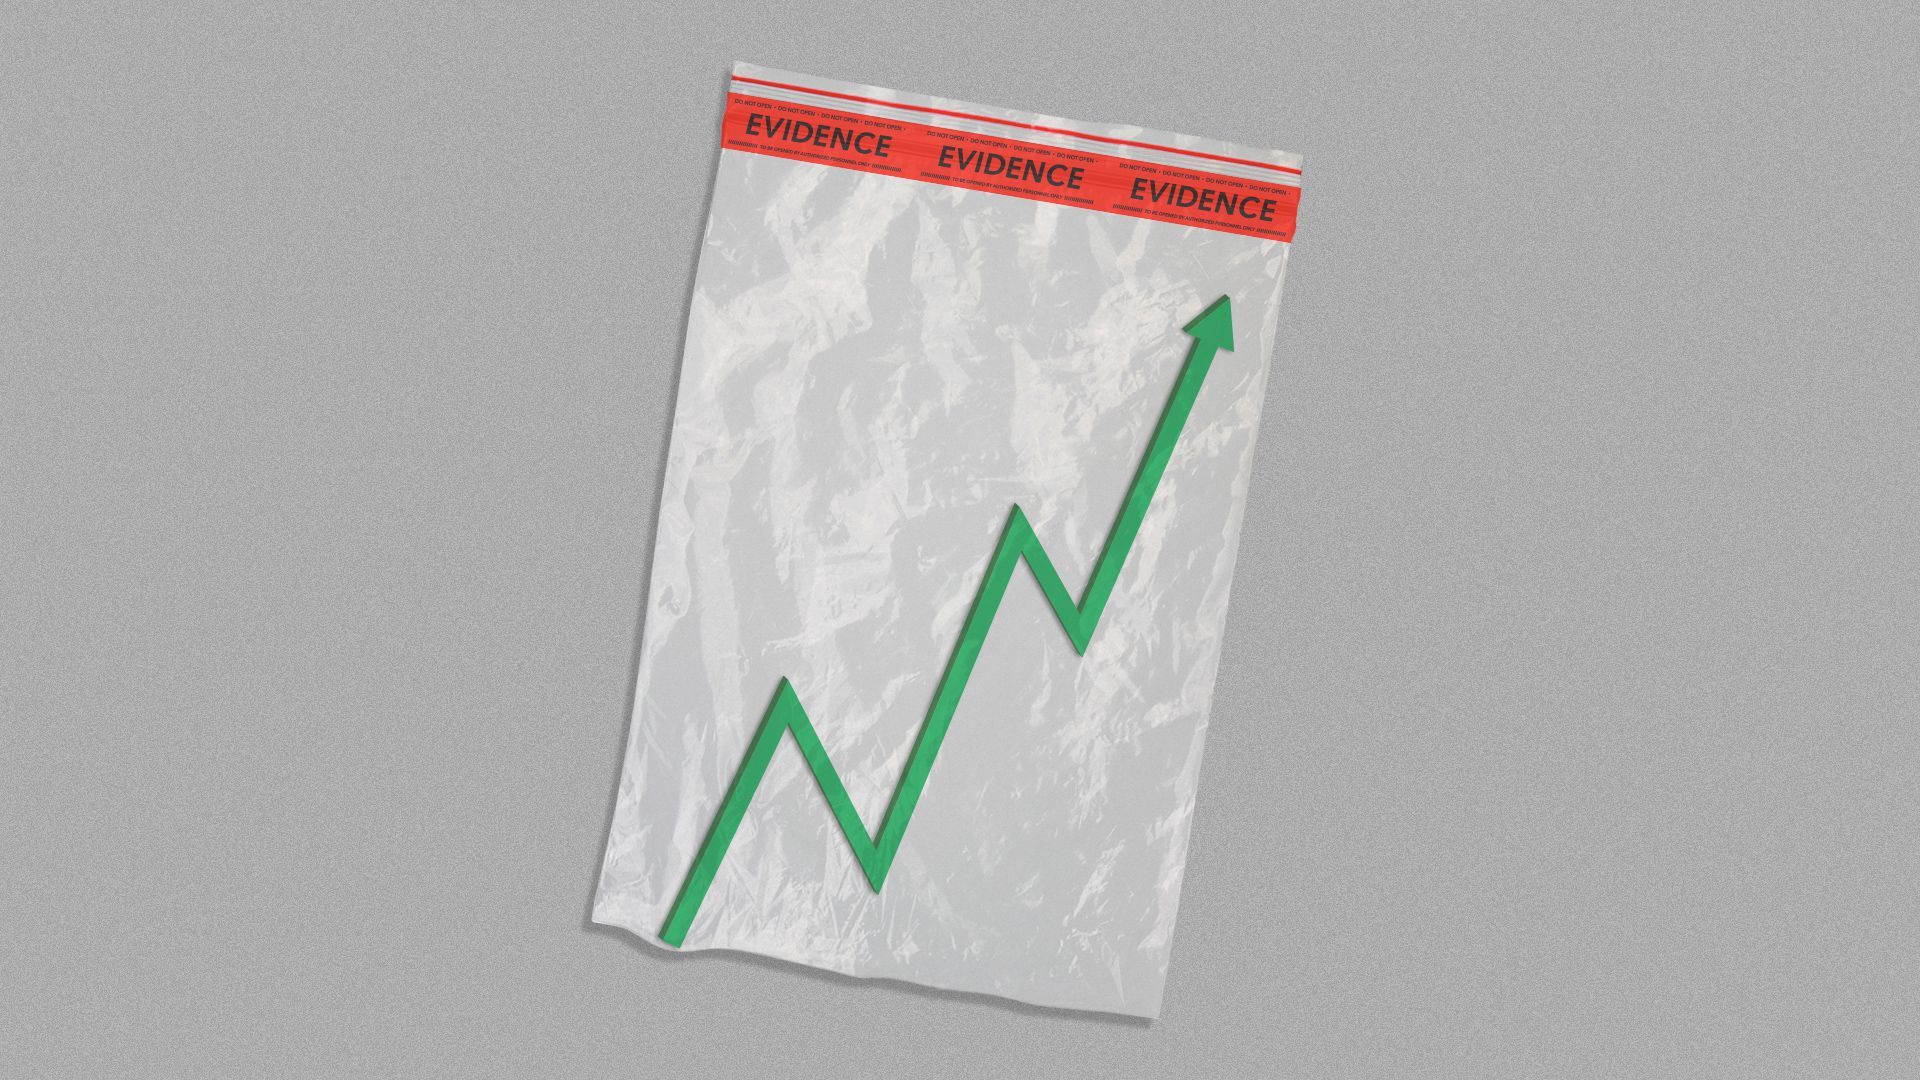 Illustration of a plastic evidence bag with an upwards trending bar line in it. 